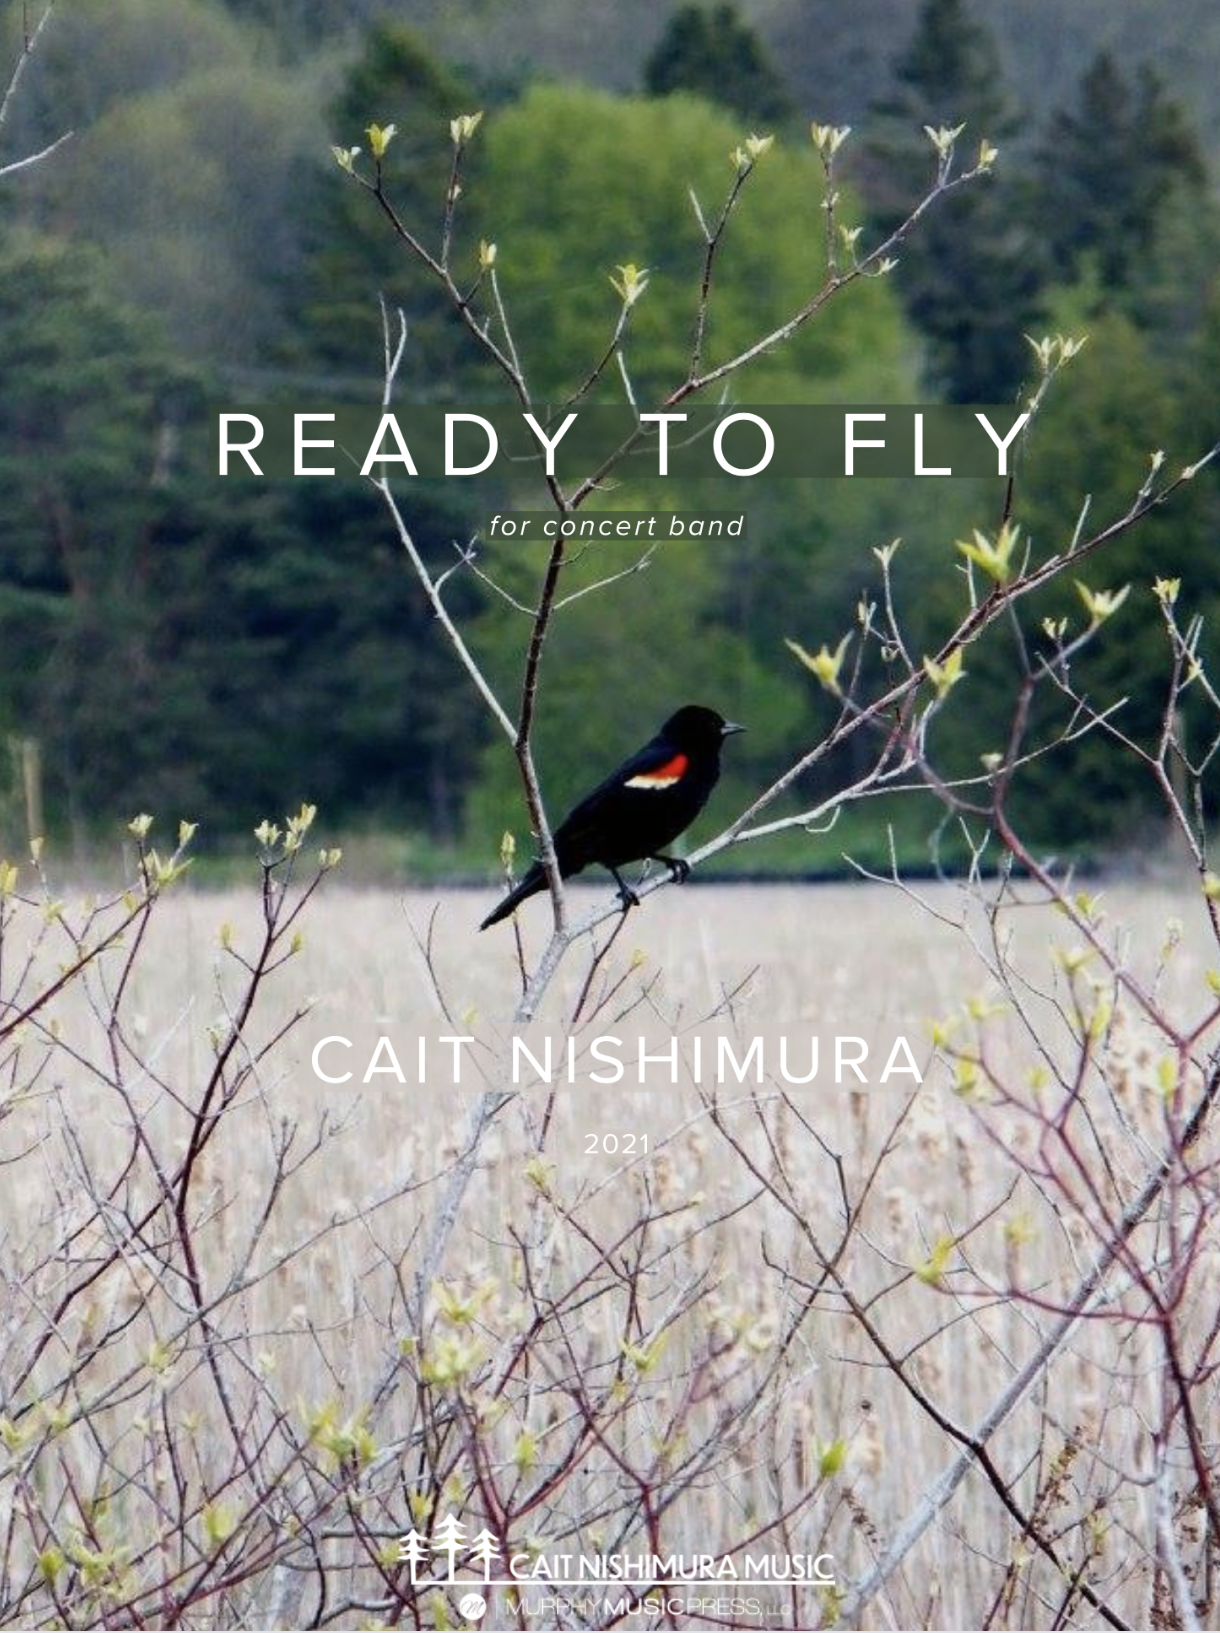 Ready To Fly by Cait Nishimura